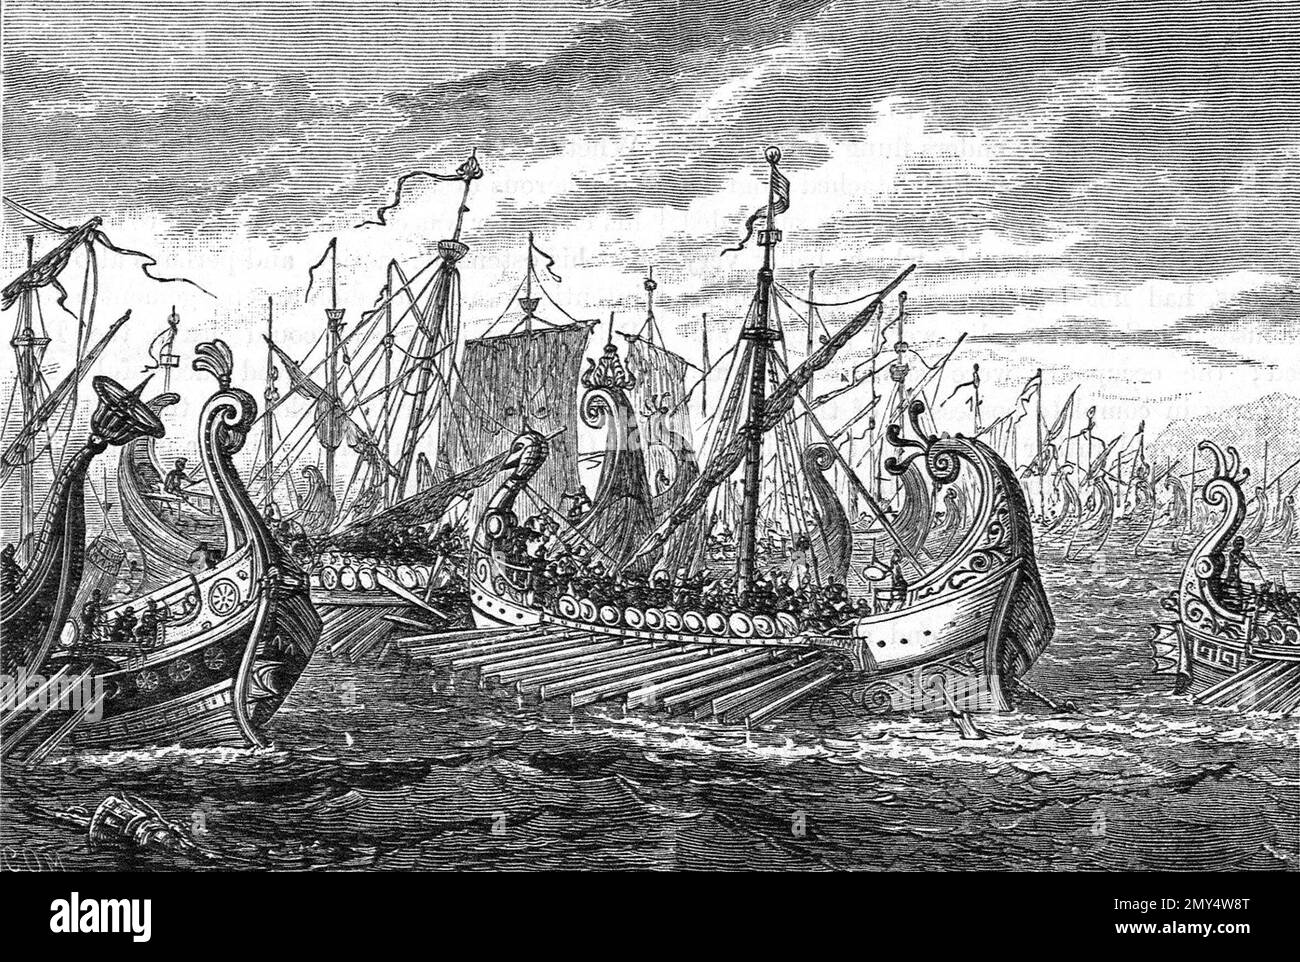 The Battle of Salamis. Illustration of the battle between the Greeks ...